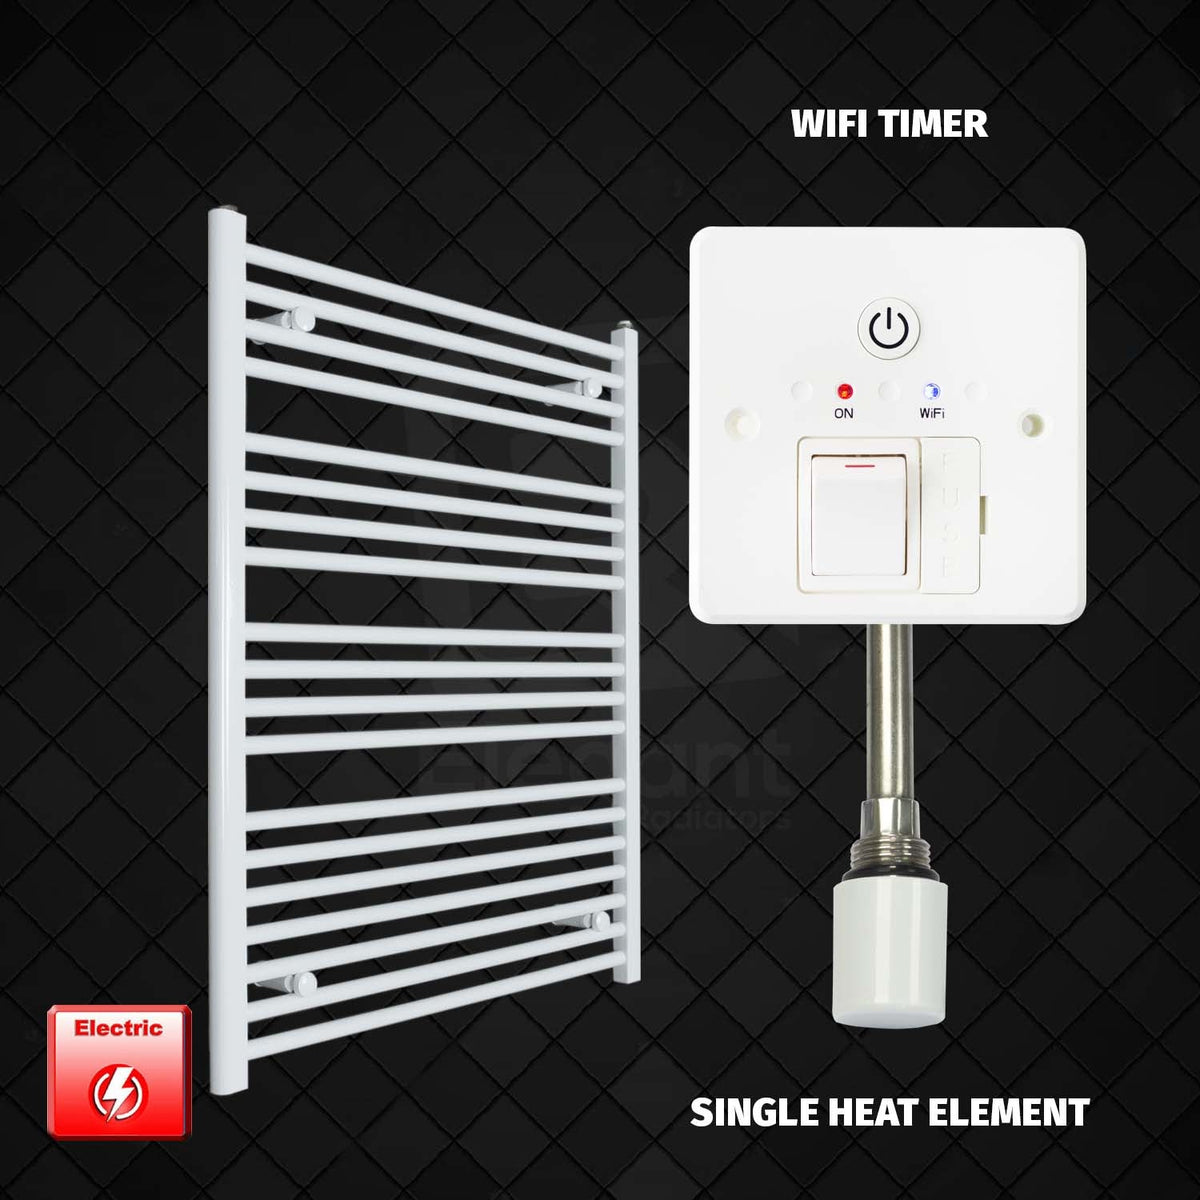 1000 mm High 800 mm Wide Pre-Filled Electric Heated Towel Rail Radiator White HTR Single heat element Wifi timer